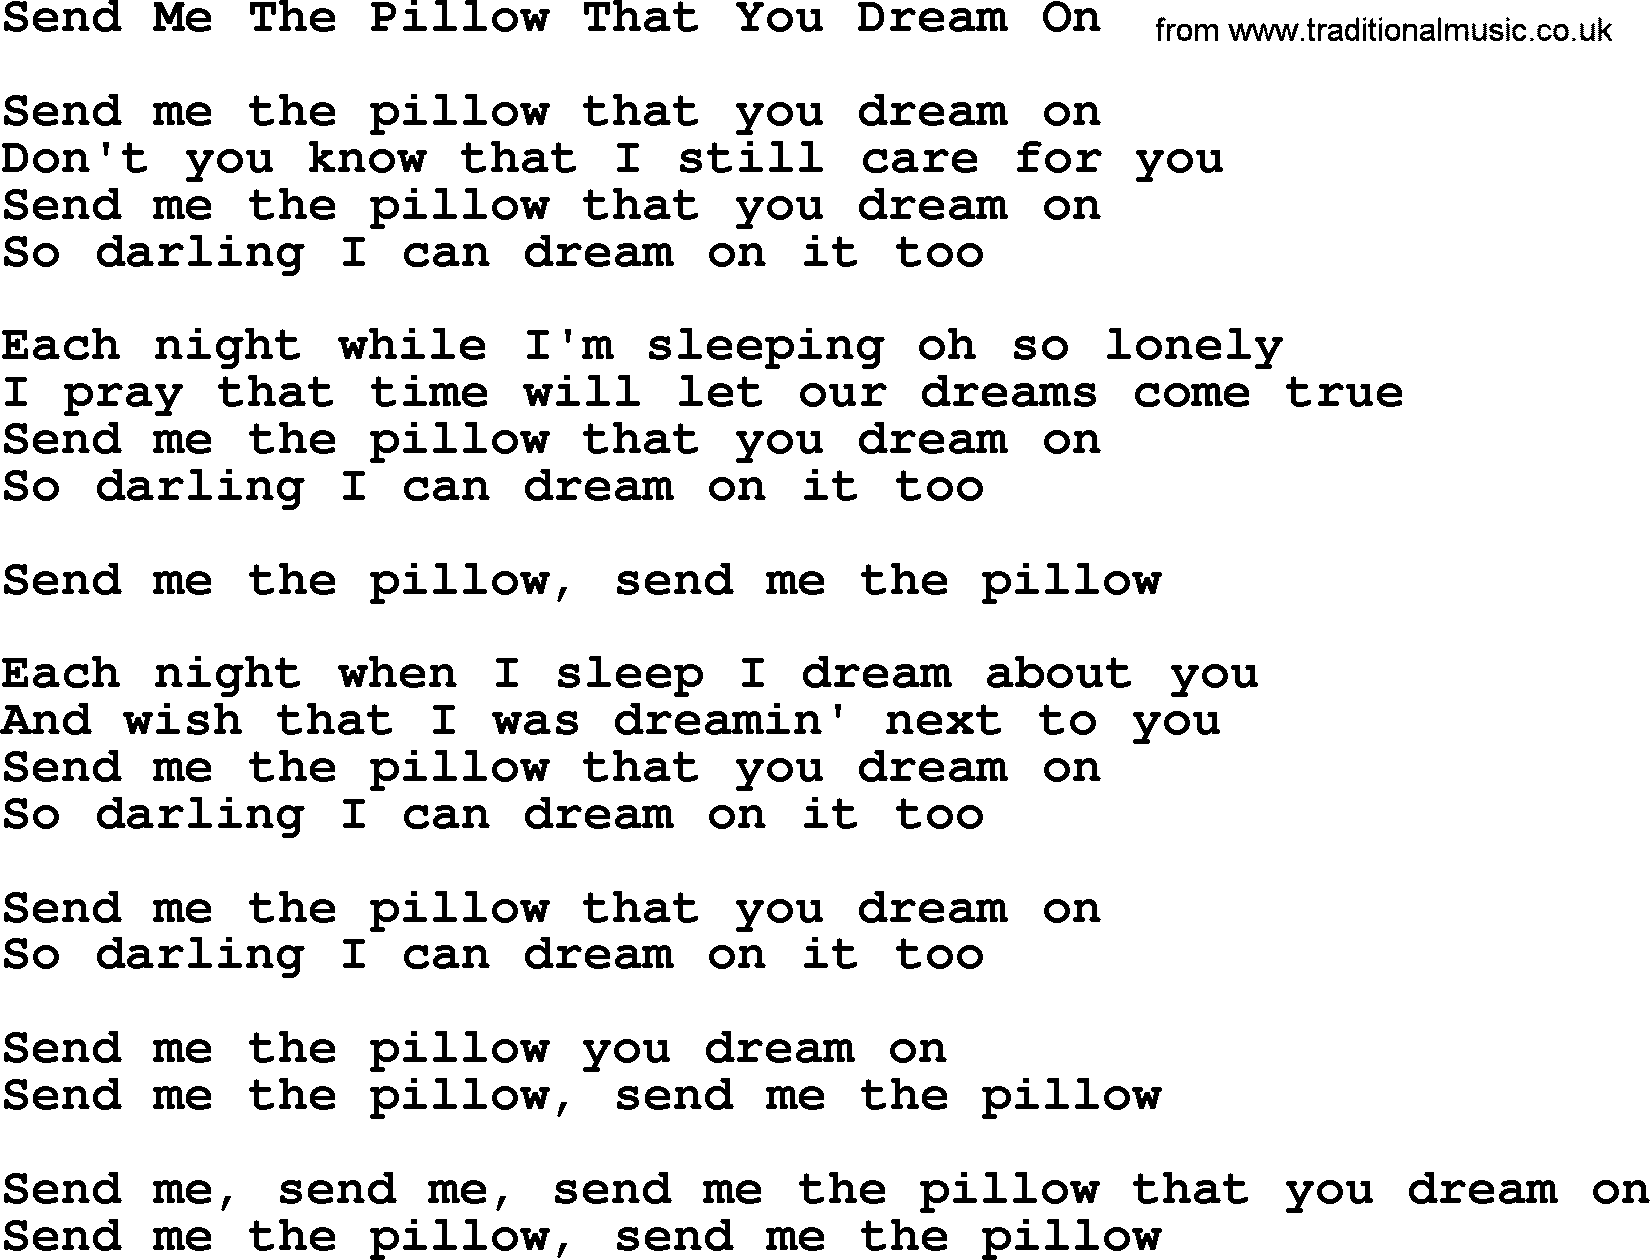 Dolly Parton song Send Me The Pillow That You Dream On.txt lyrics